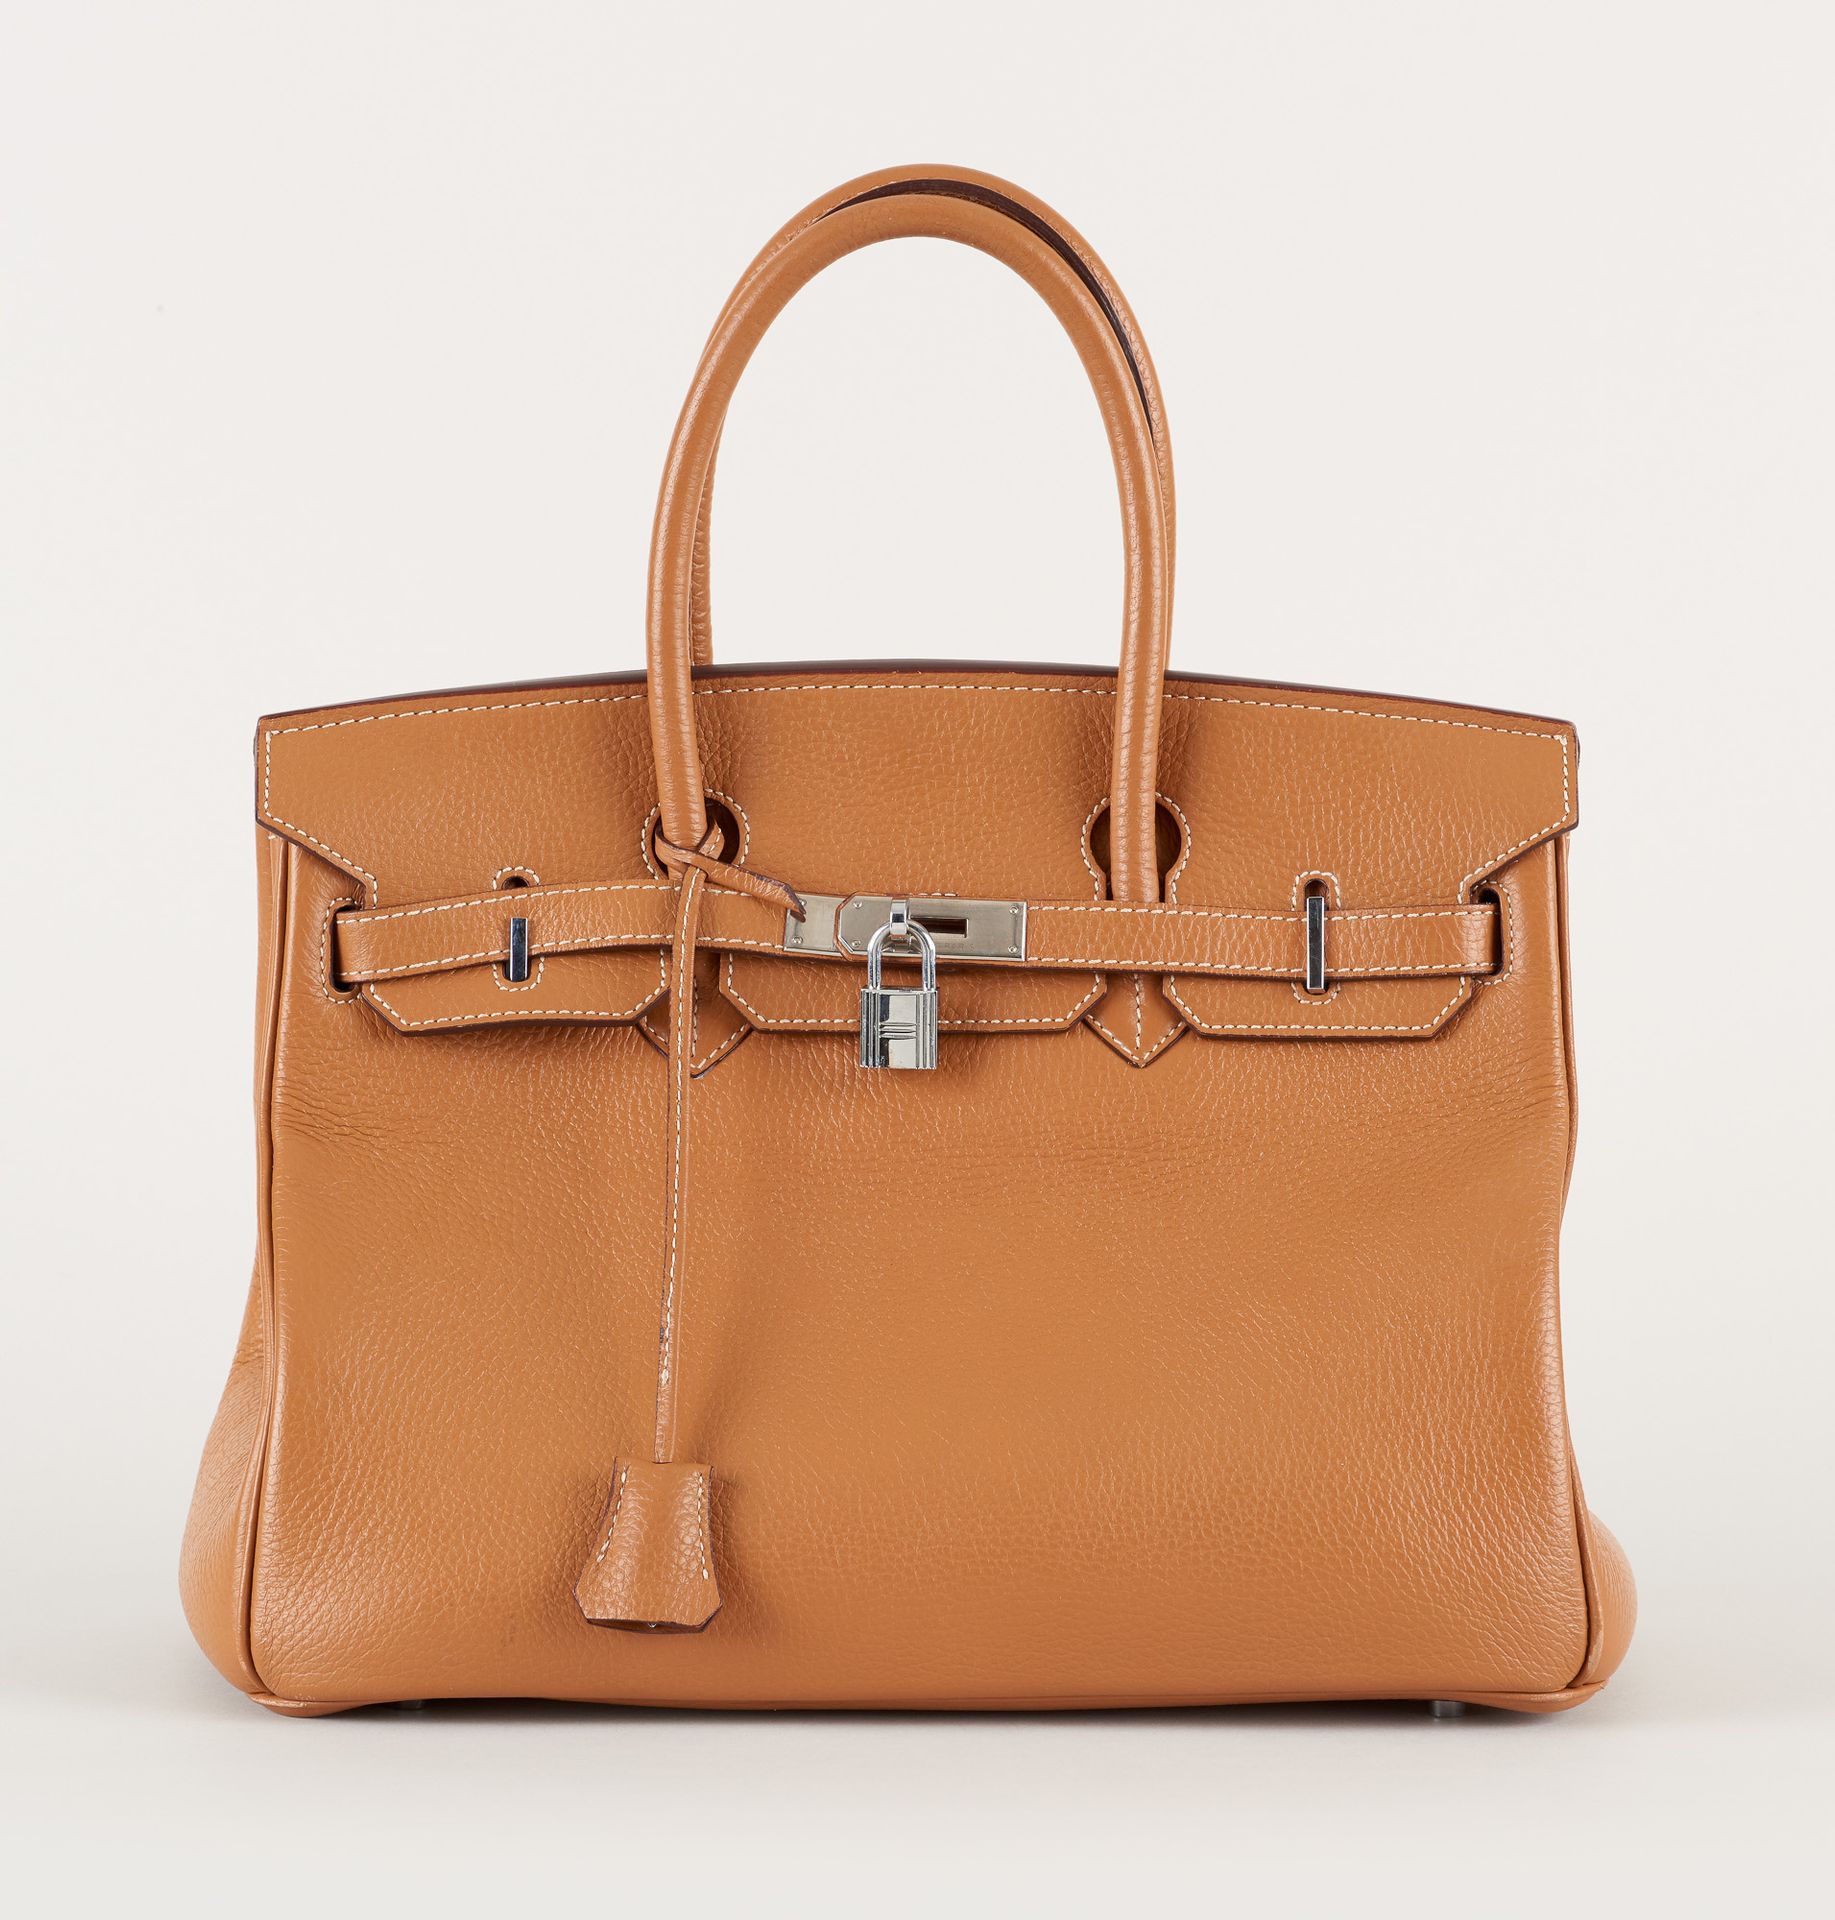 HERMES. Leather goods: Handbag in grained leather, cognac color.

From Hermès, "&hellip;